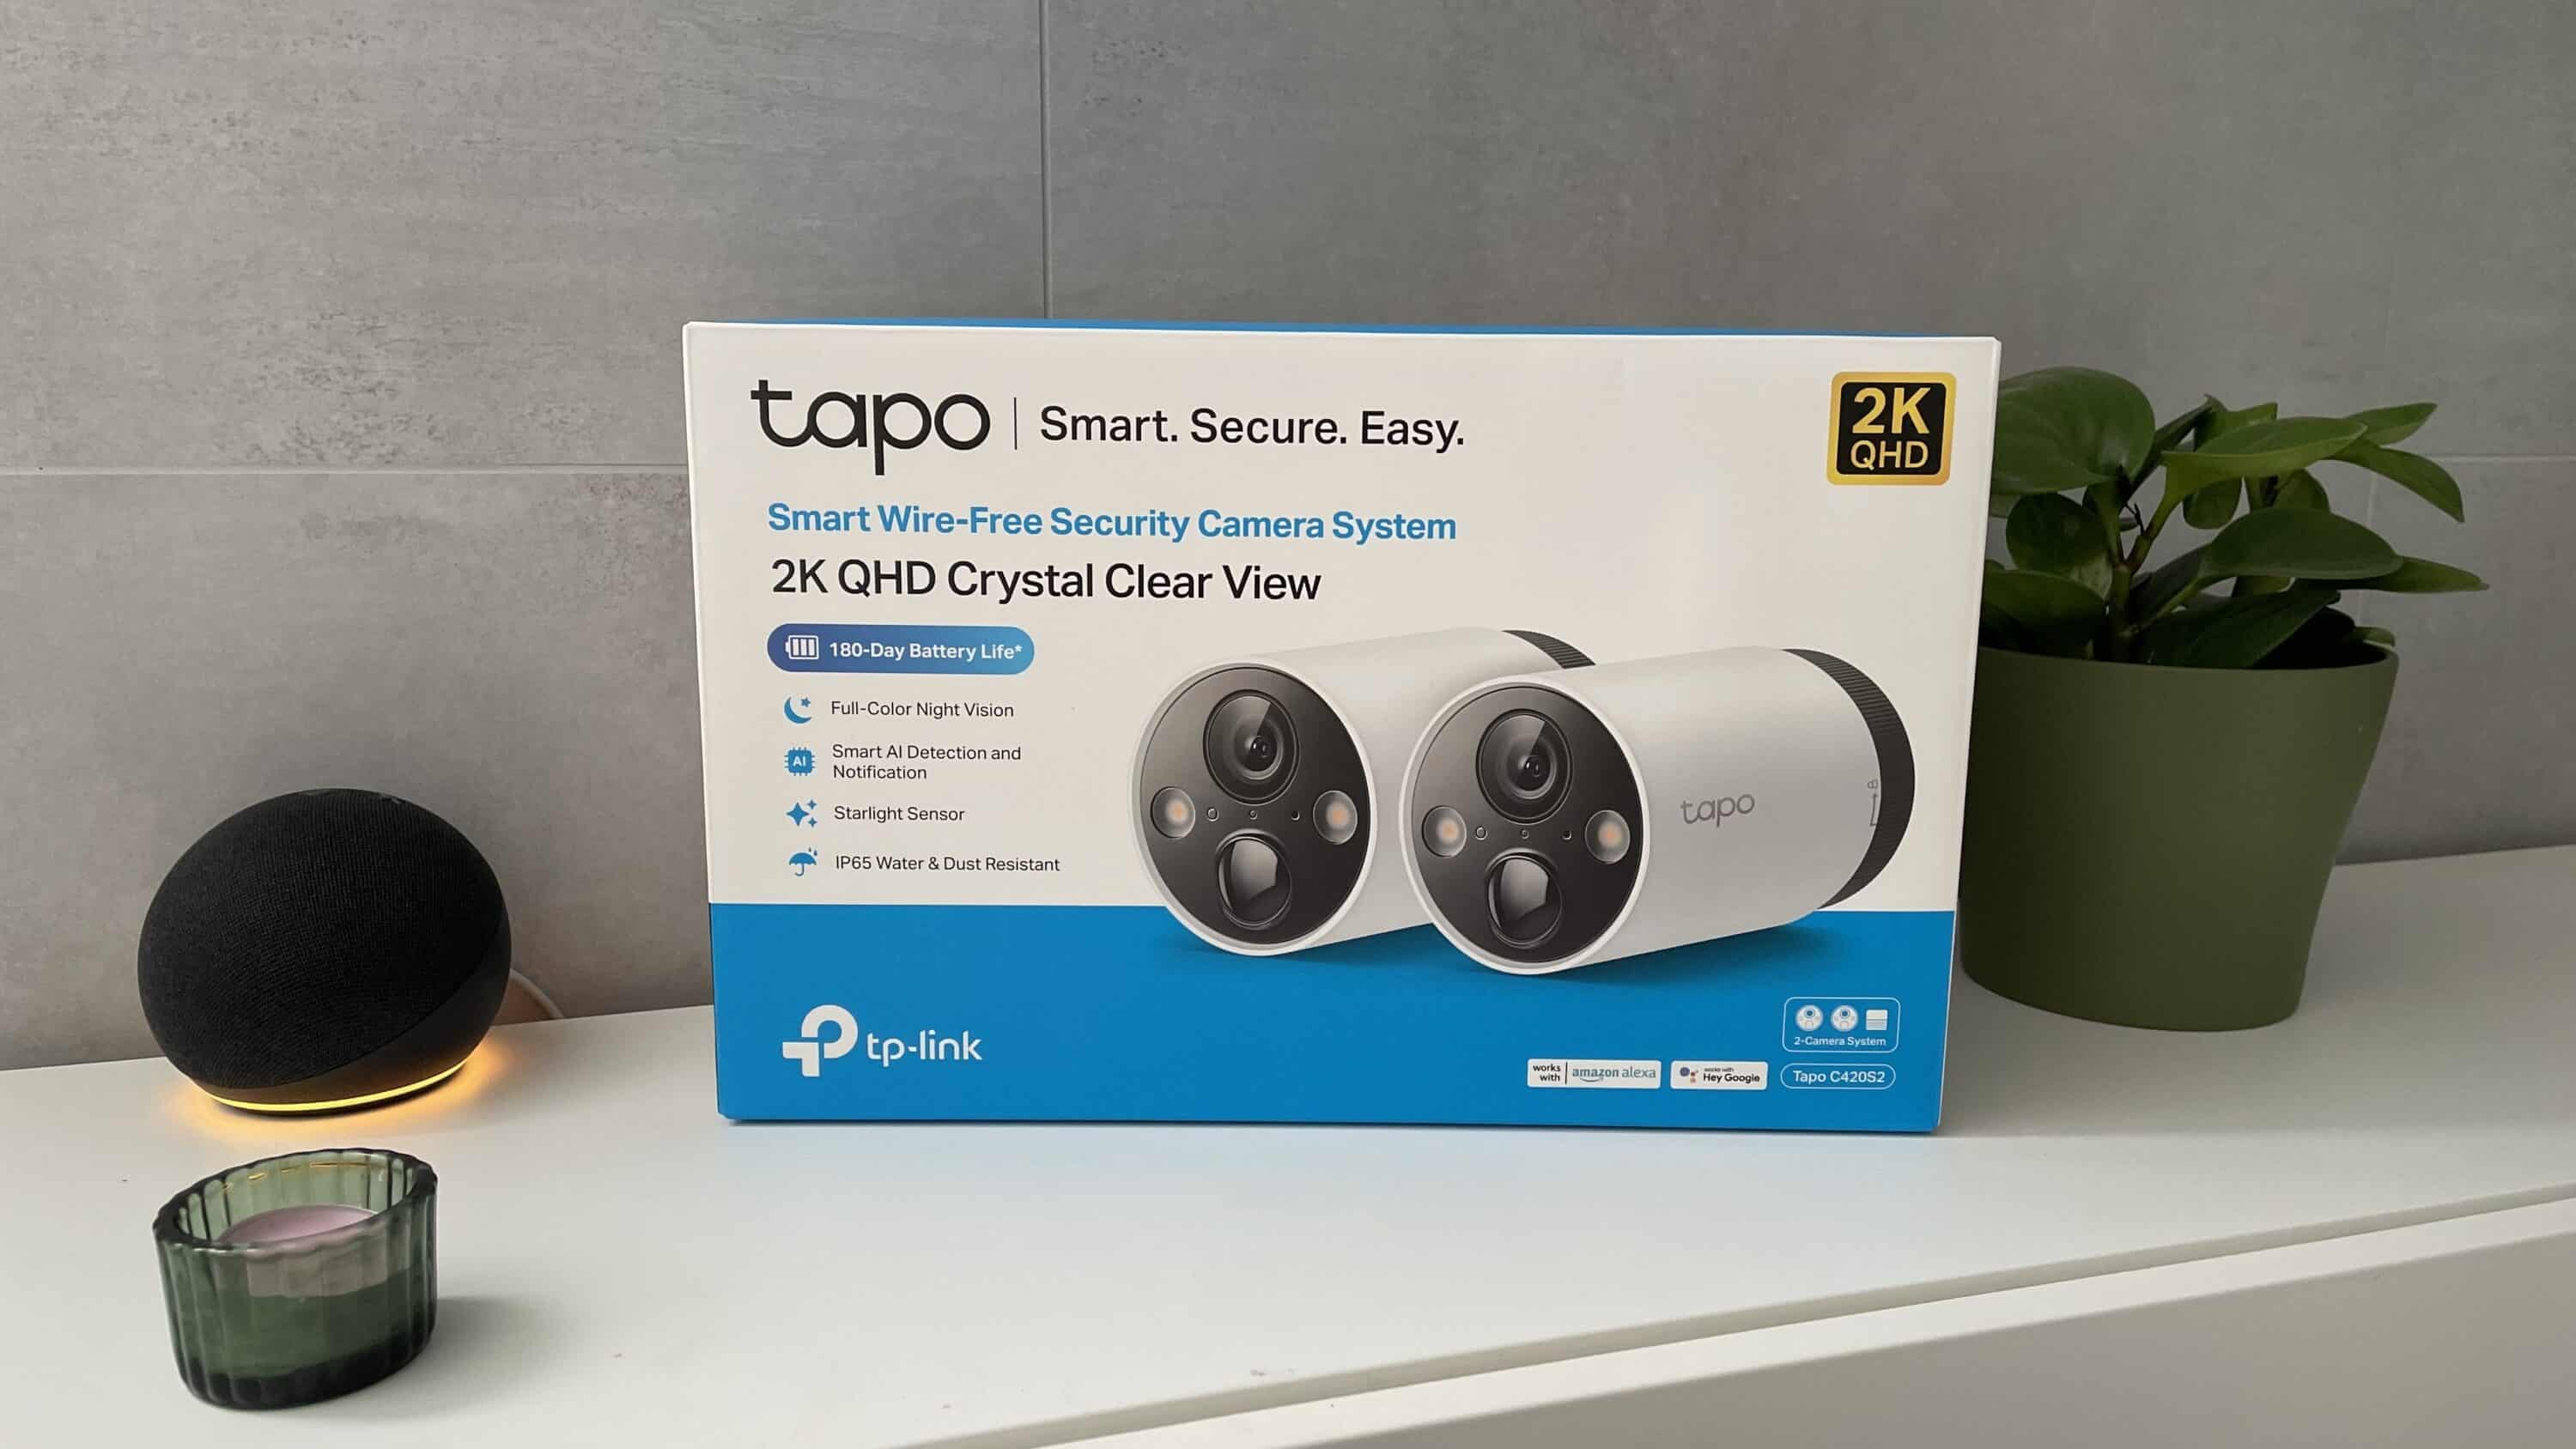 Tapo c200 night vision not working - Smart Home Community